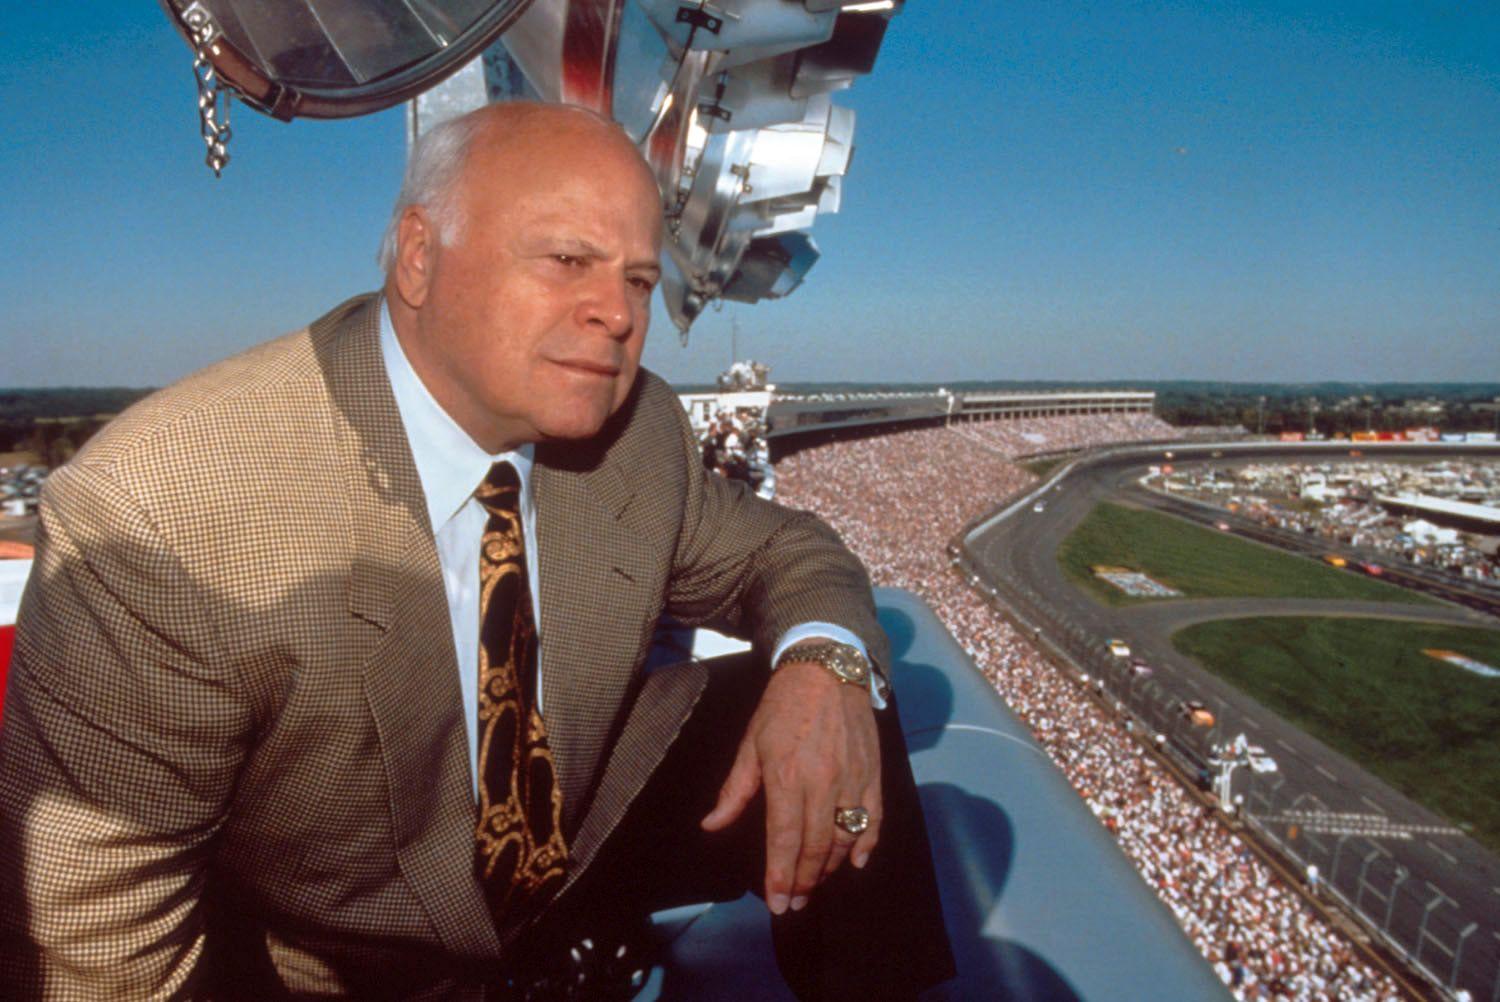 NASCAR Hall of Famer Bruton Smith Passes Away | THE SHOP